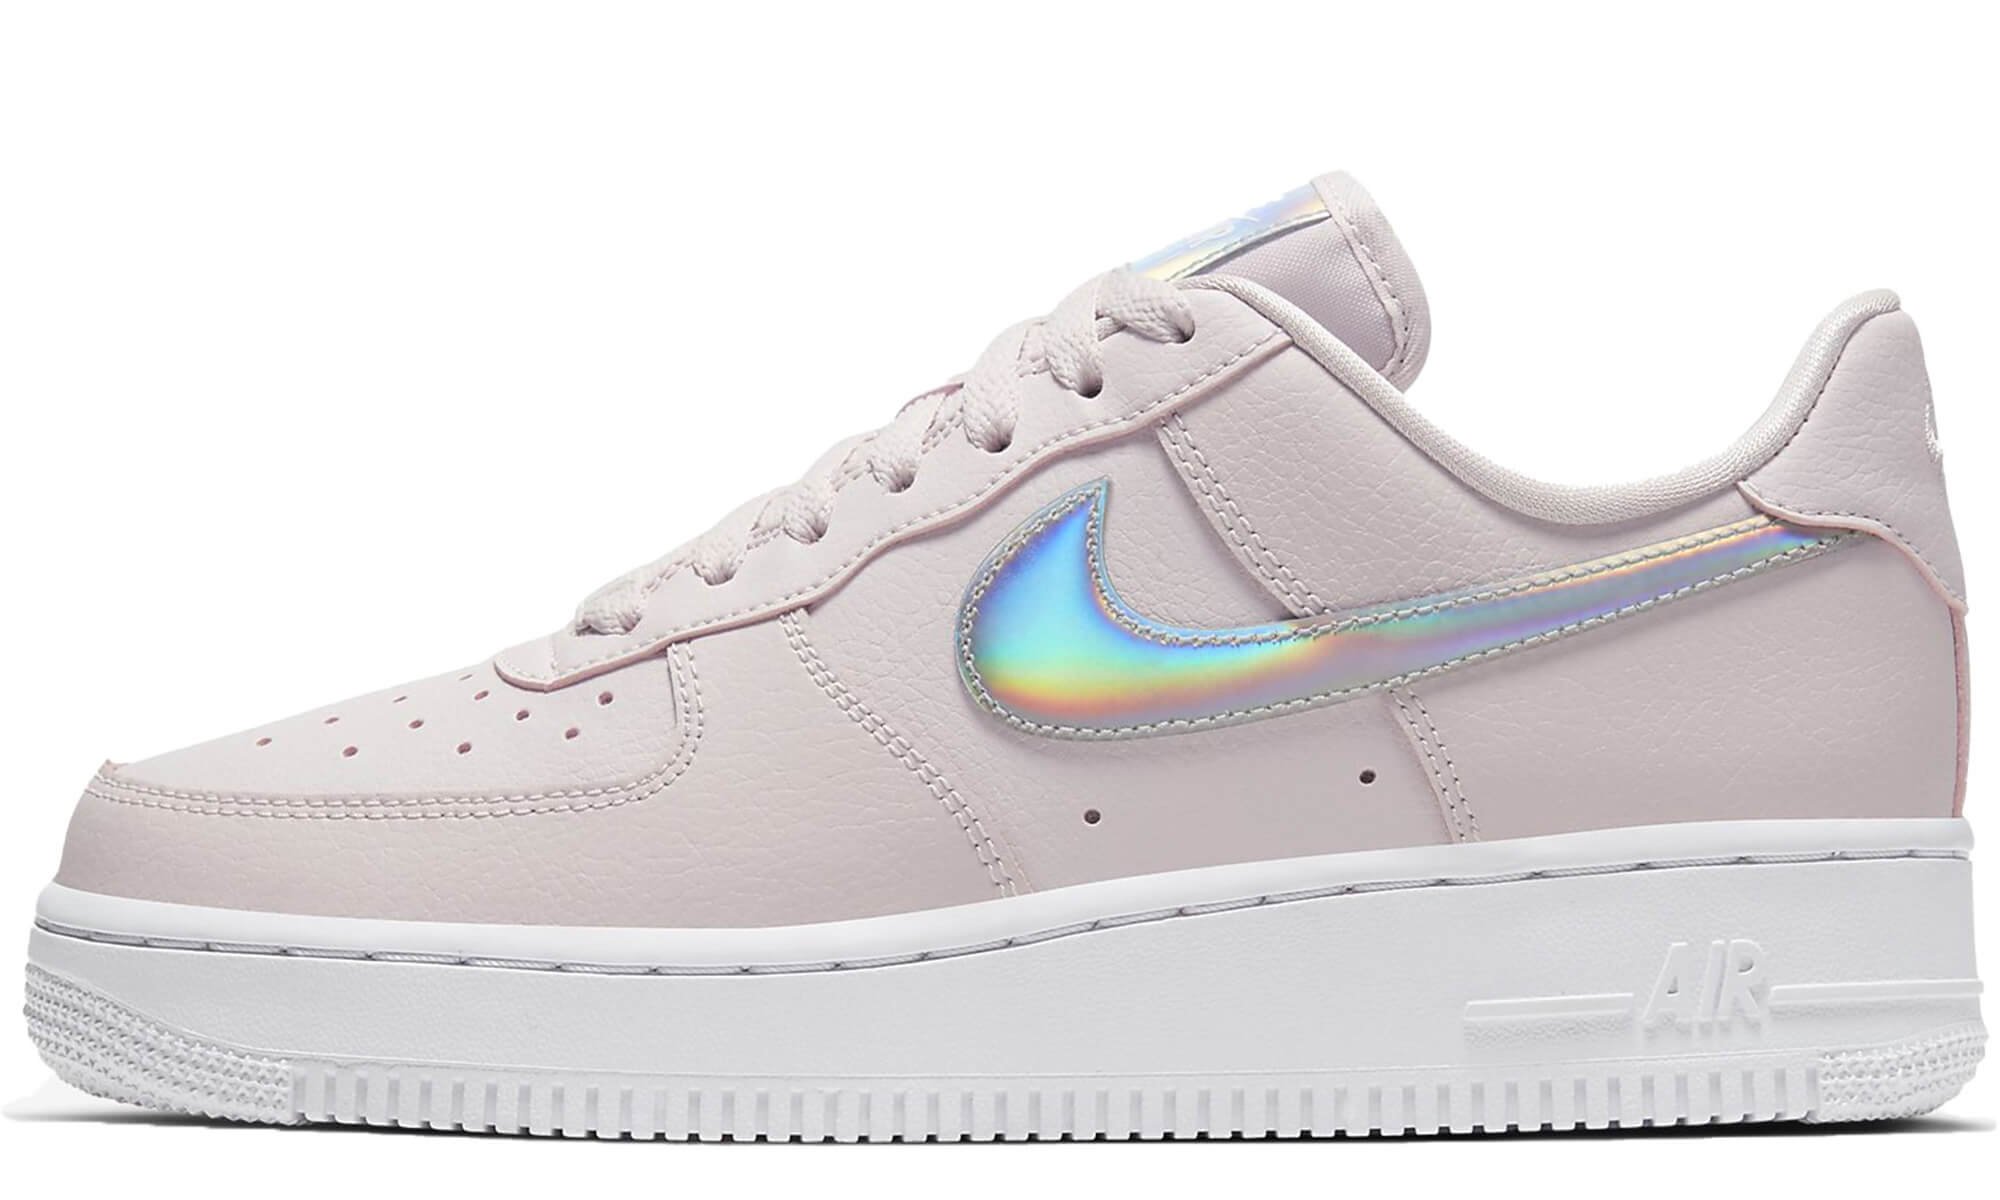 Nike Air Force 1 '07 Essential 'Barely Rose'